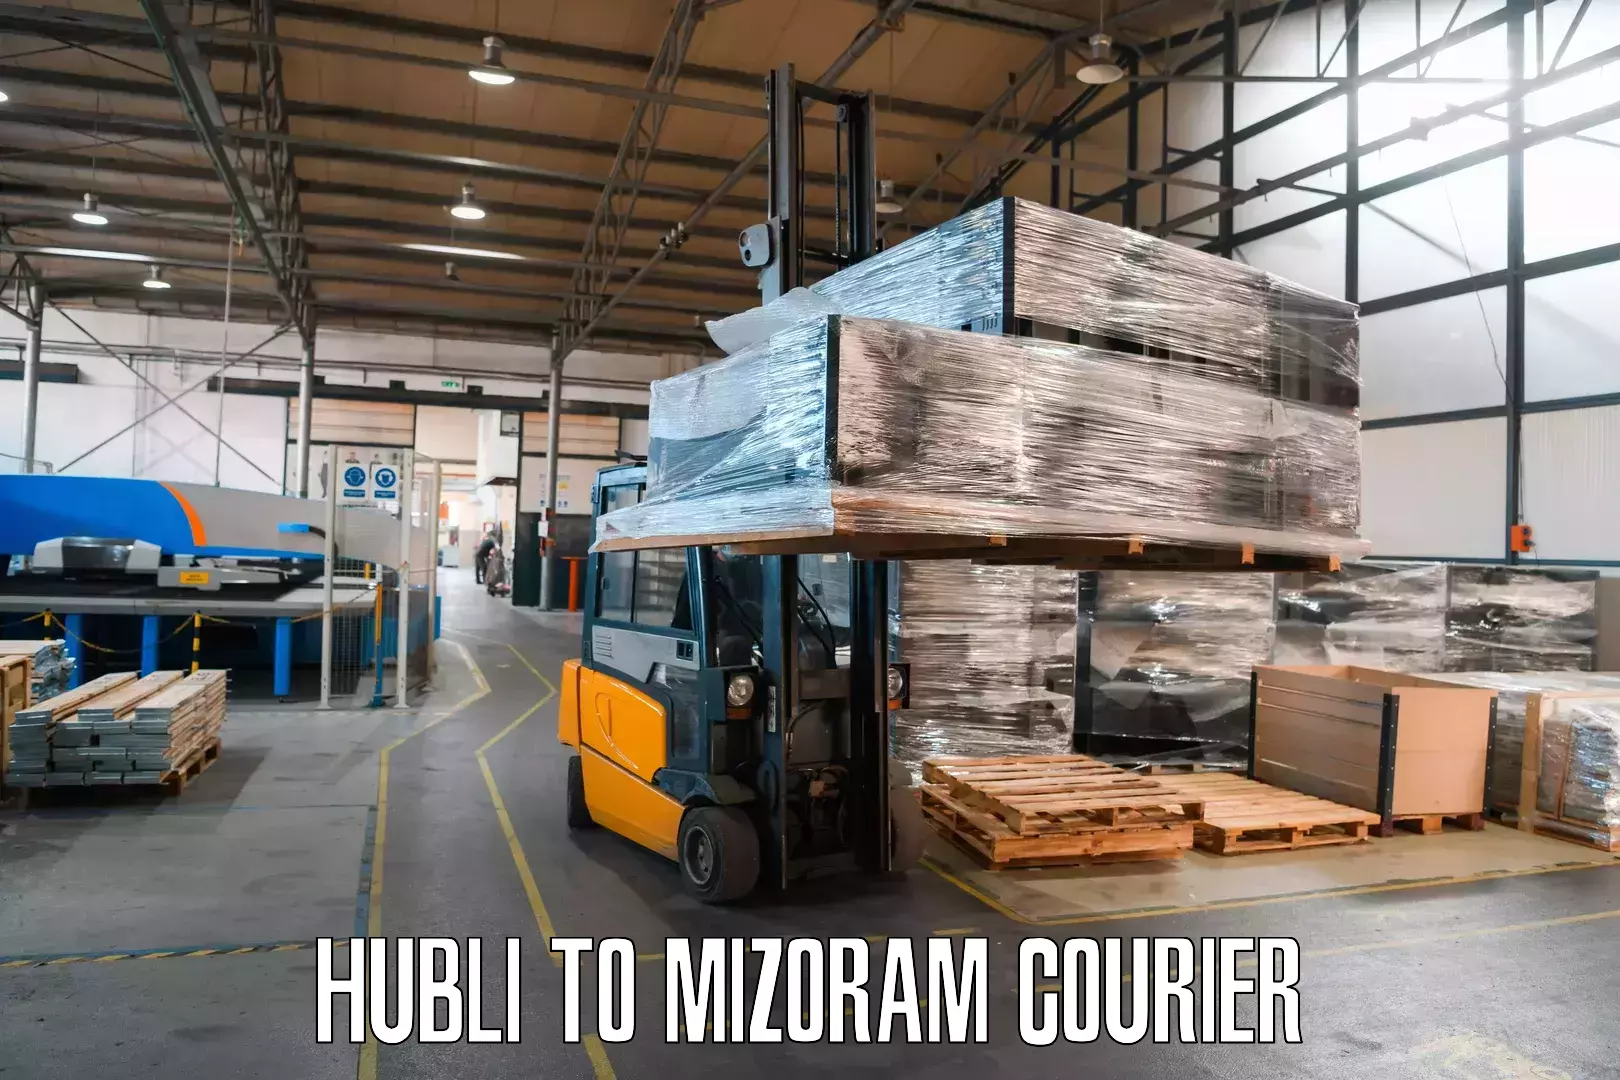 Package delivery network Hubli to Mizoram